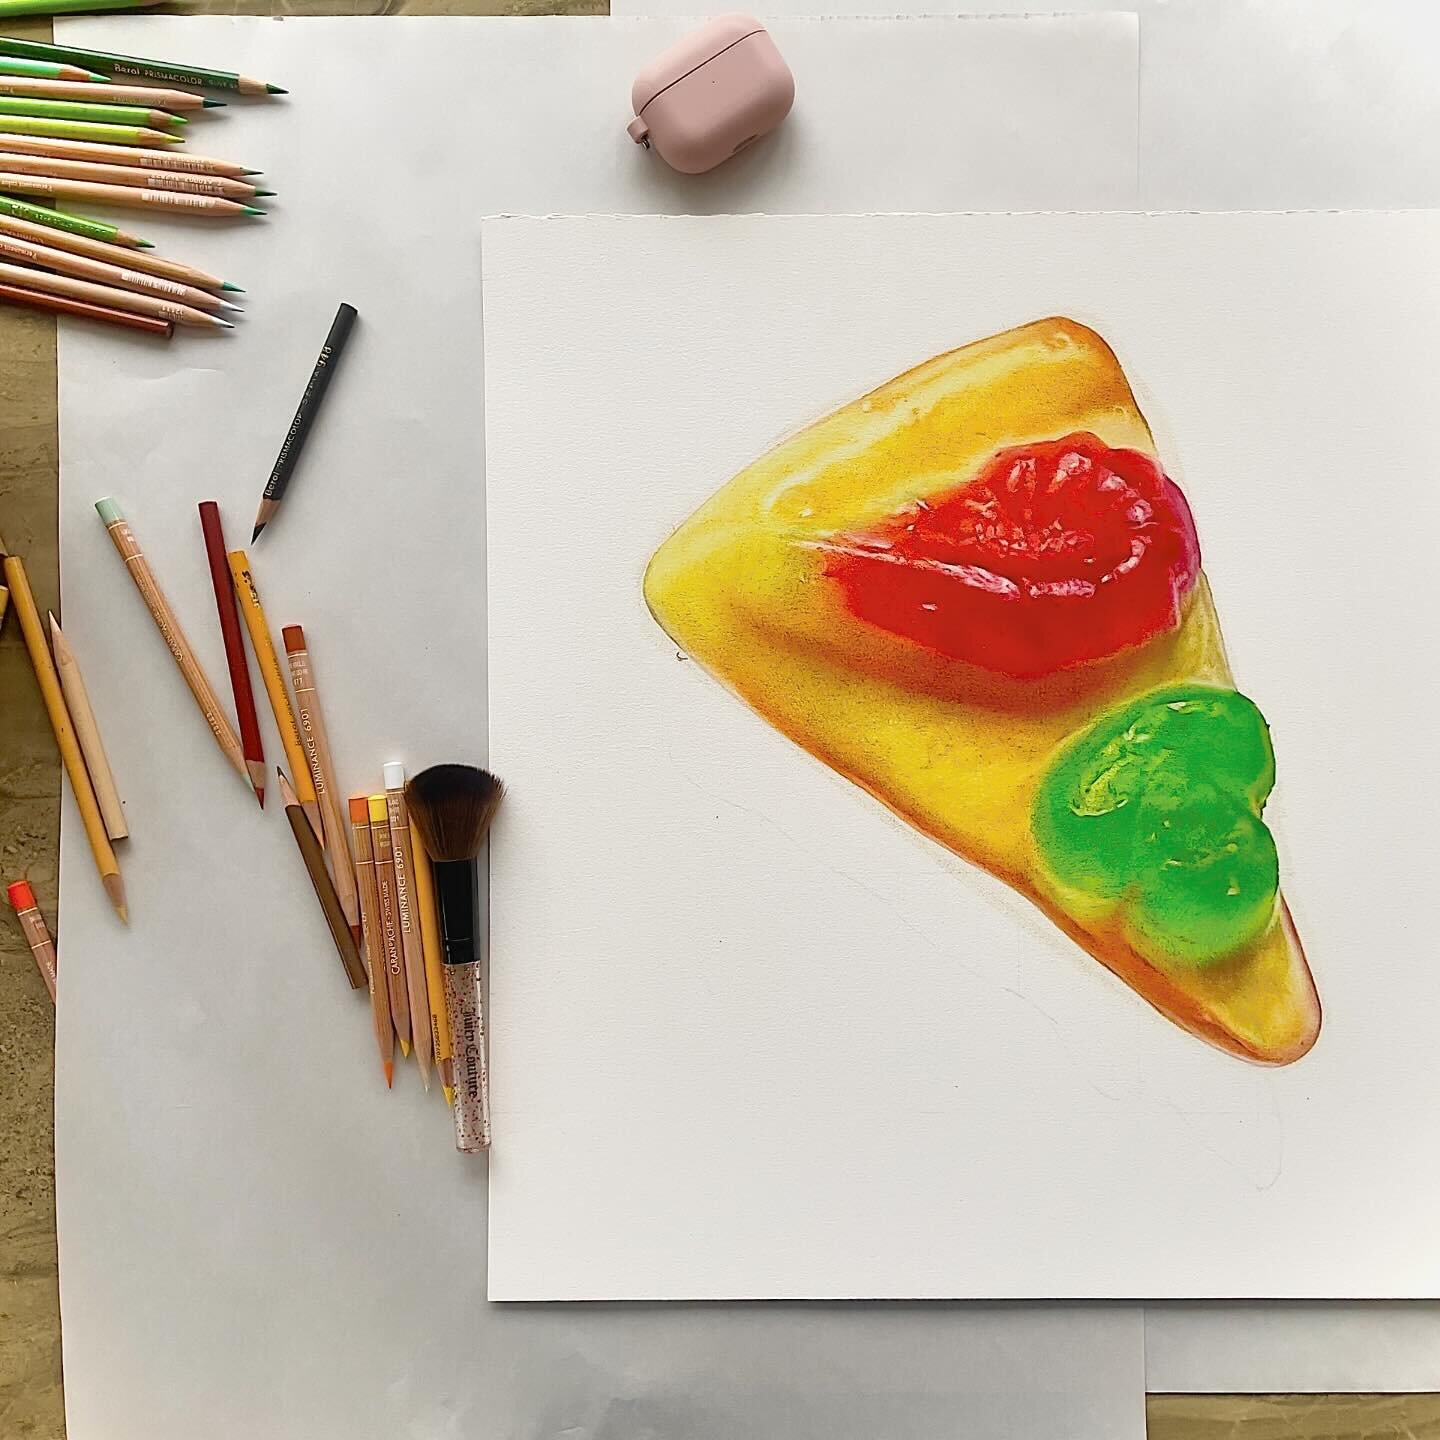 Pencil crayon pizza gummy slice drawing imminent